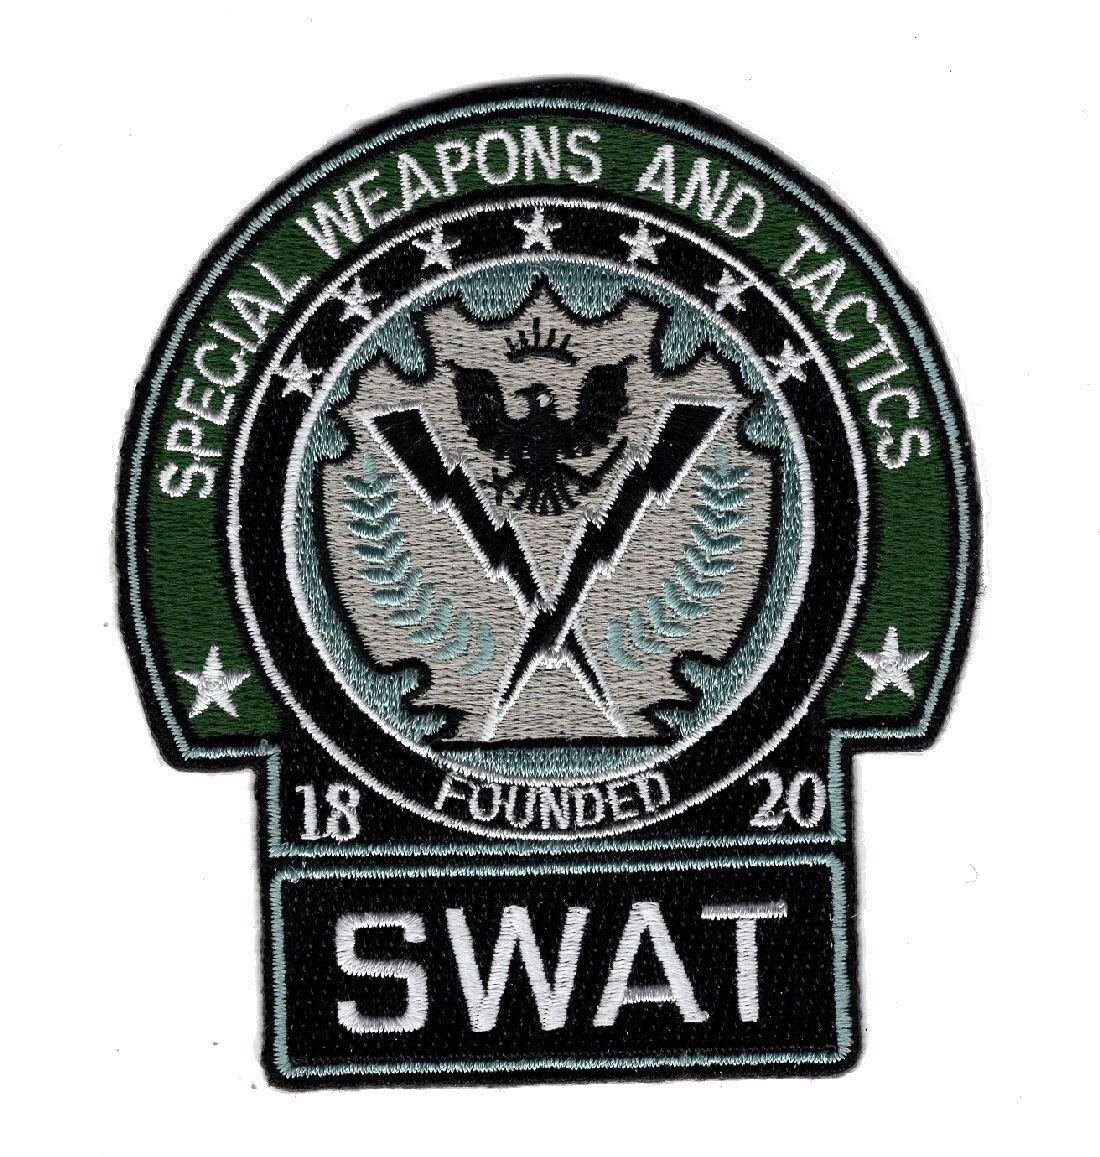 Special Weapons and Tactics Swat Police Iron on Patch